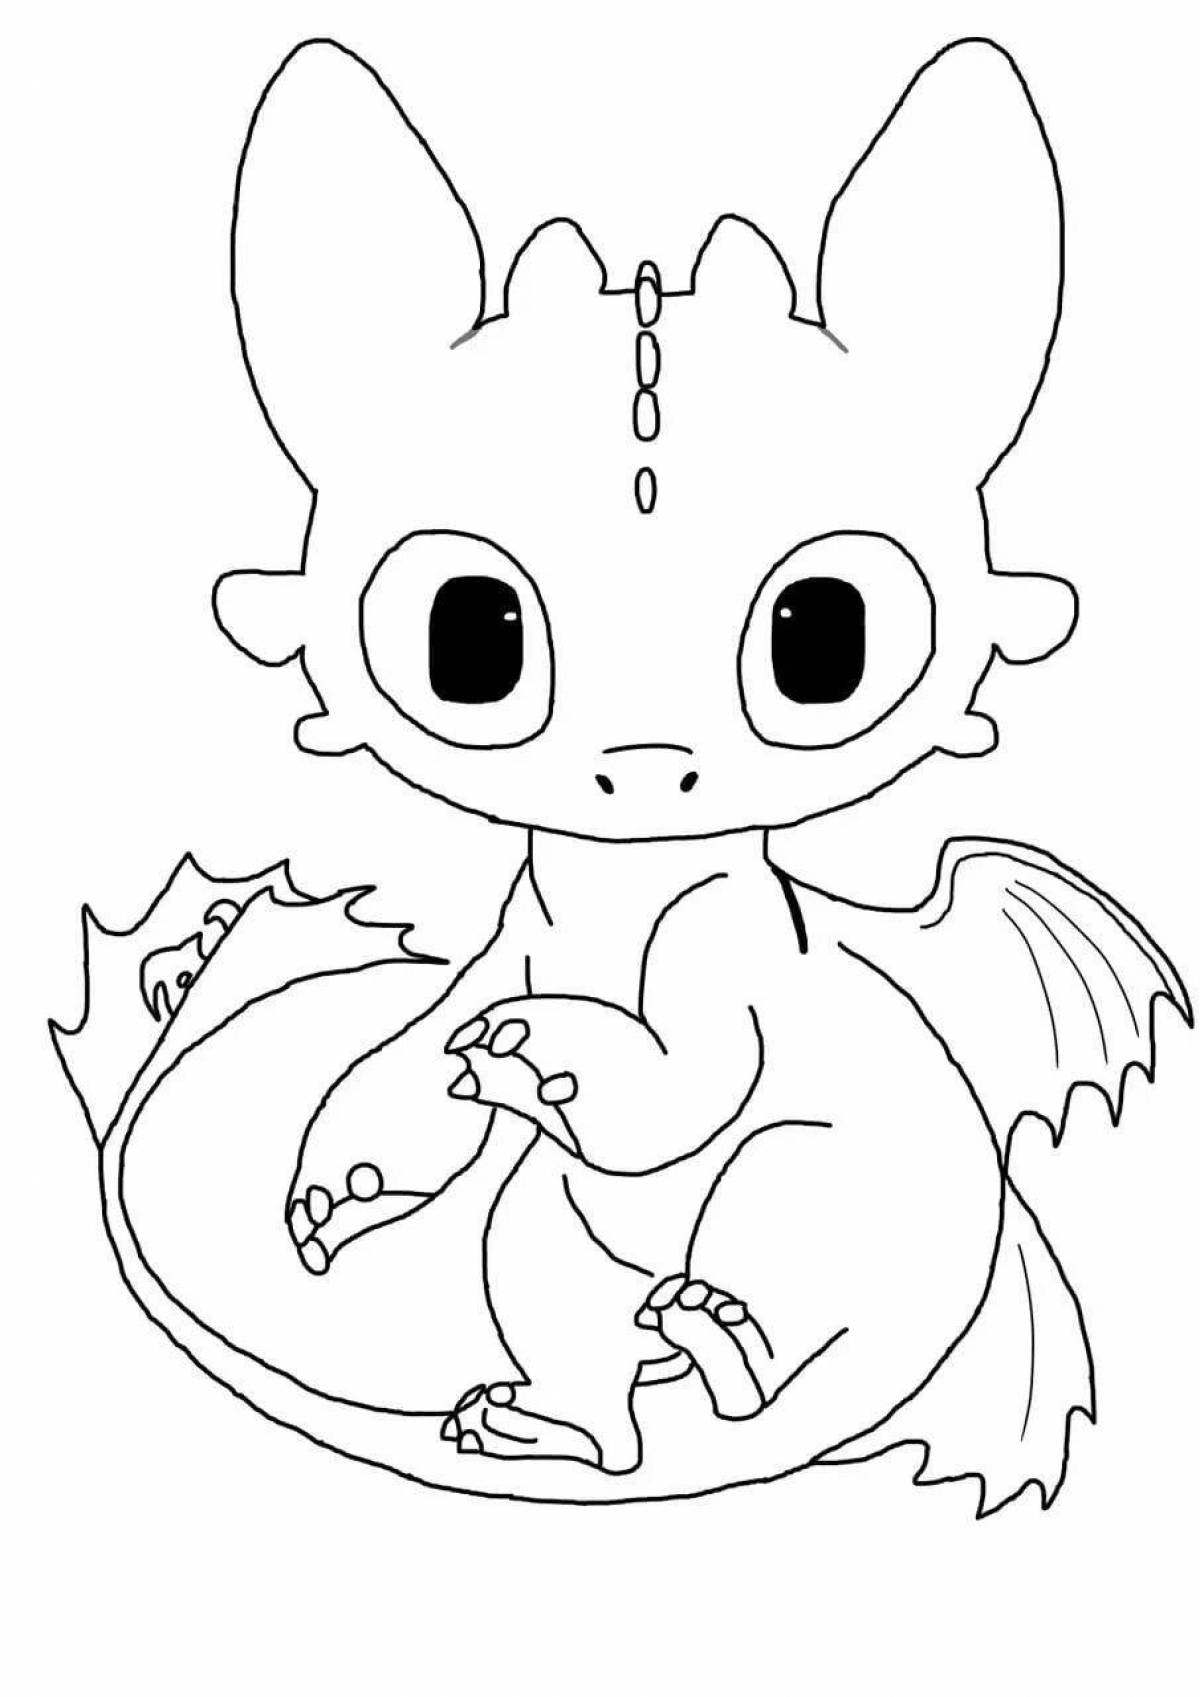 Radiant coloring page toothless for kids